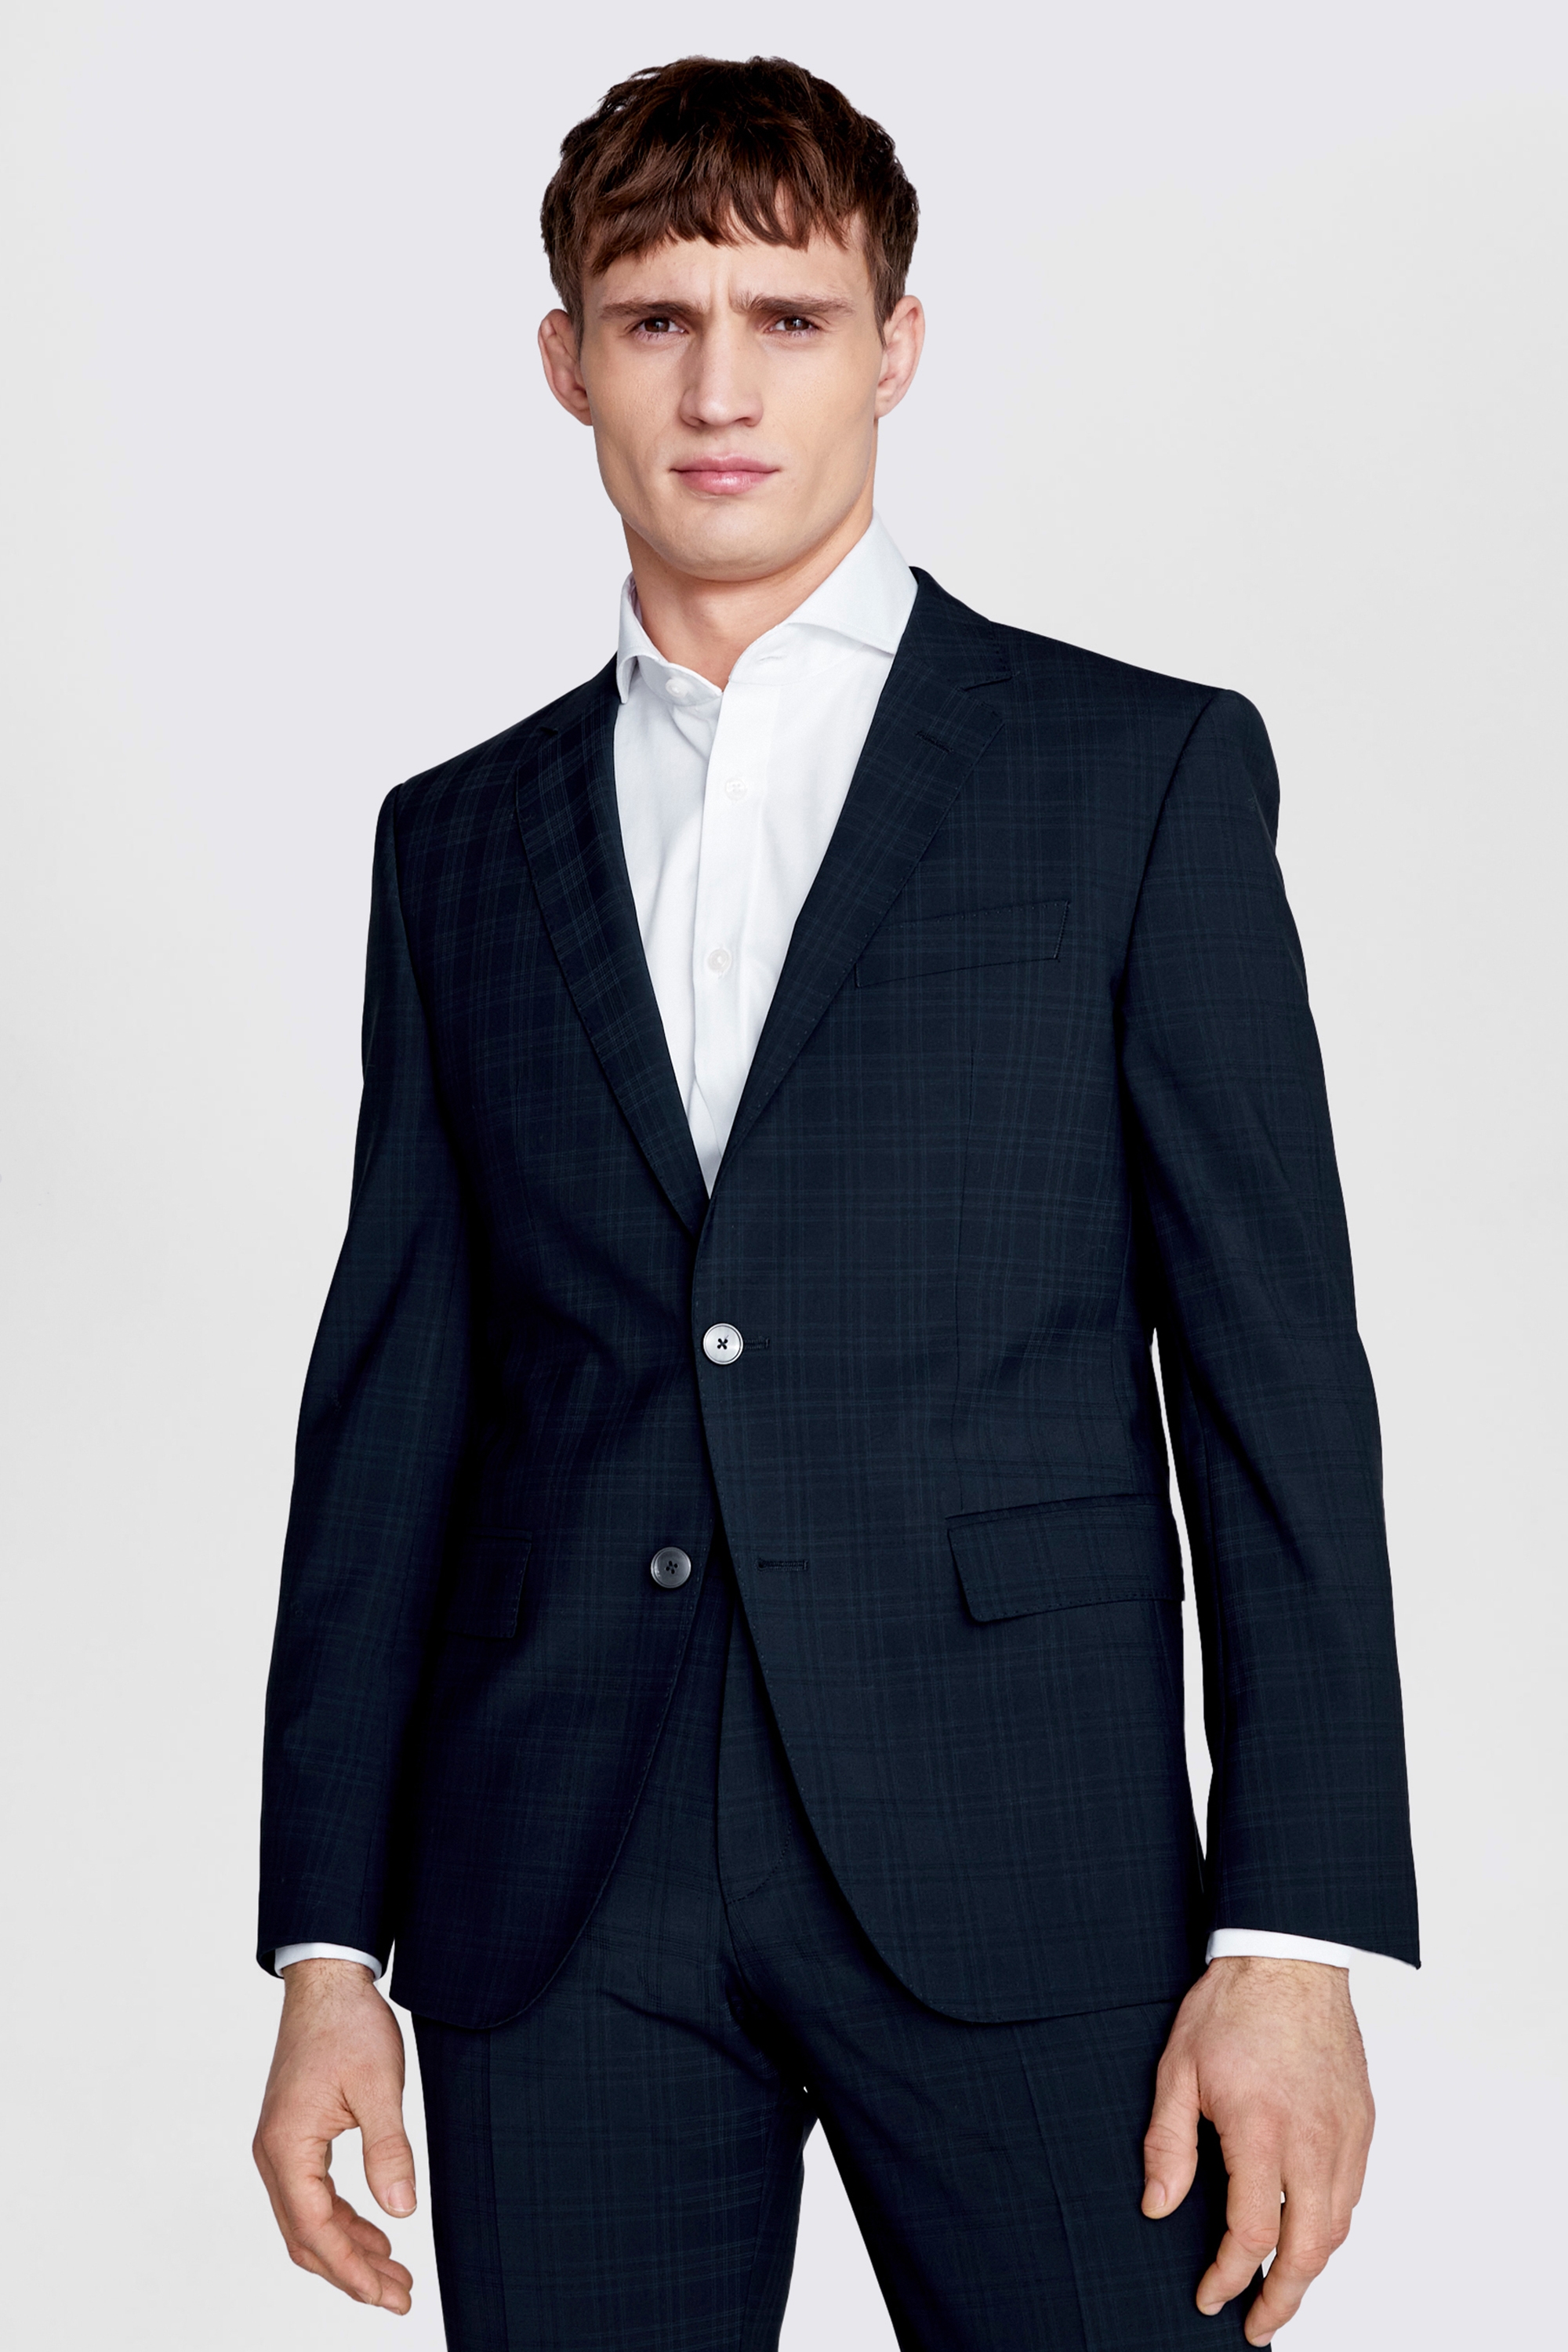 Boss Slim Fit Navy Check Jacket | Buy Online at Moss